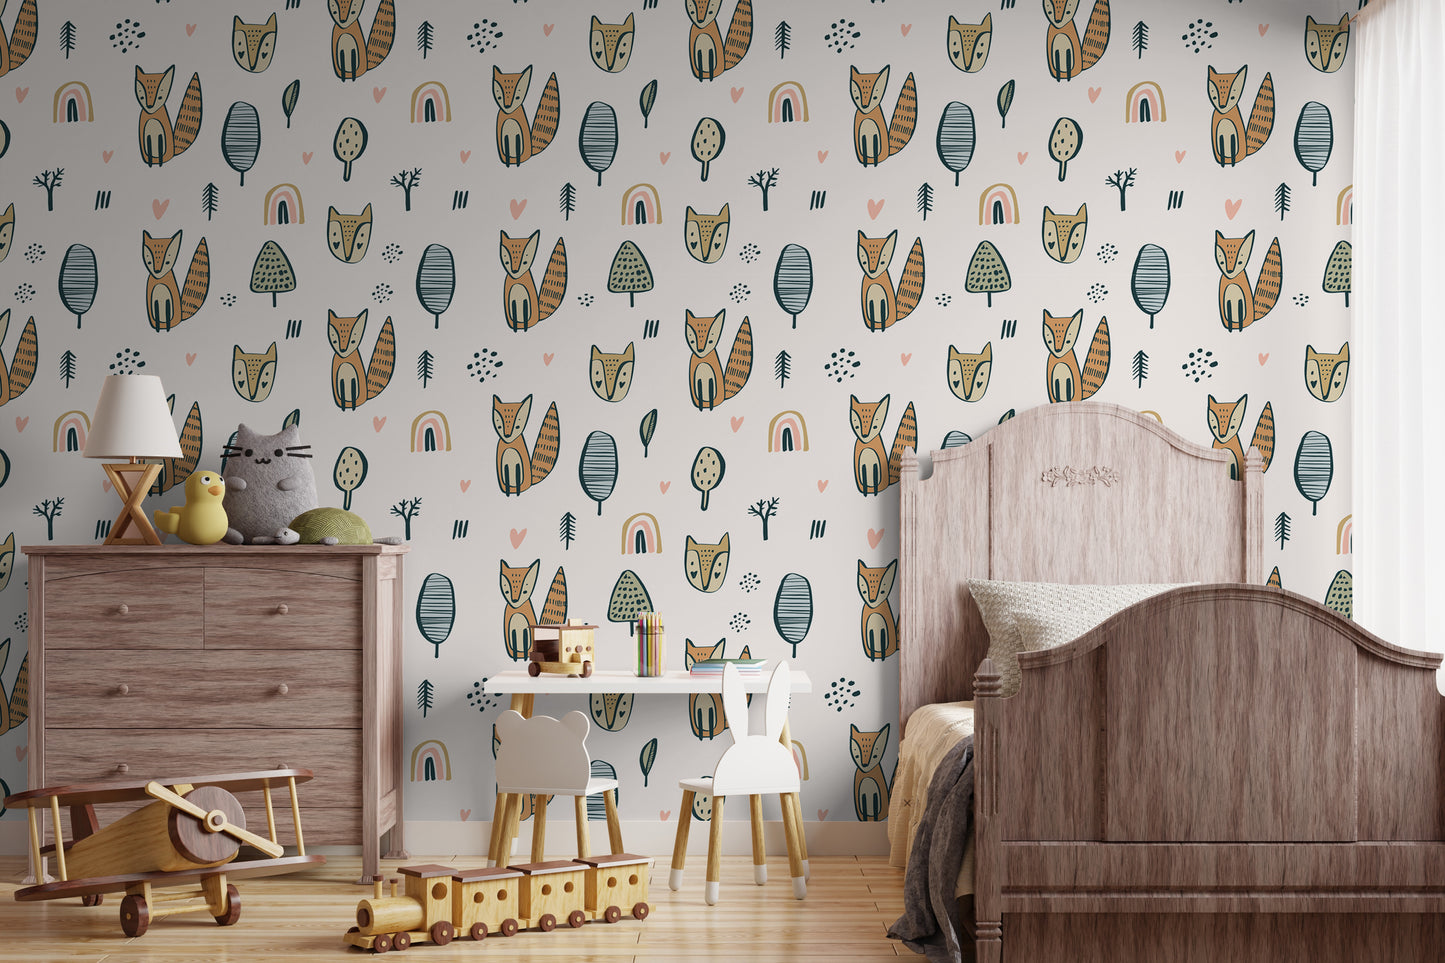 Fox In The Forest Removable Peel And Stick Wallpaper